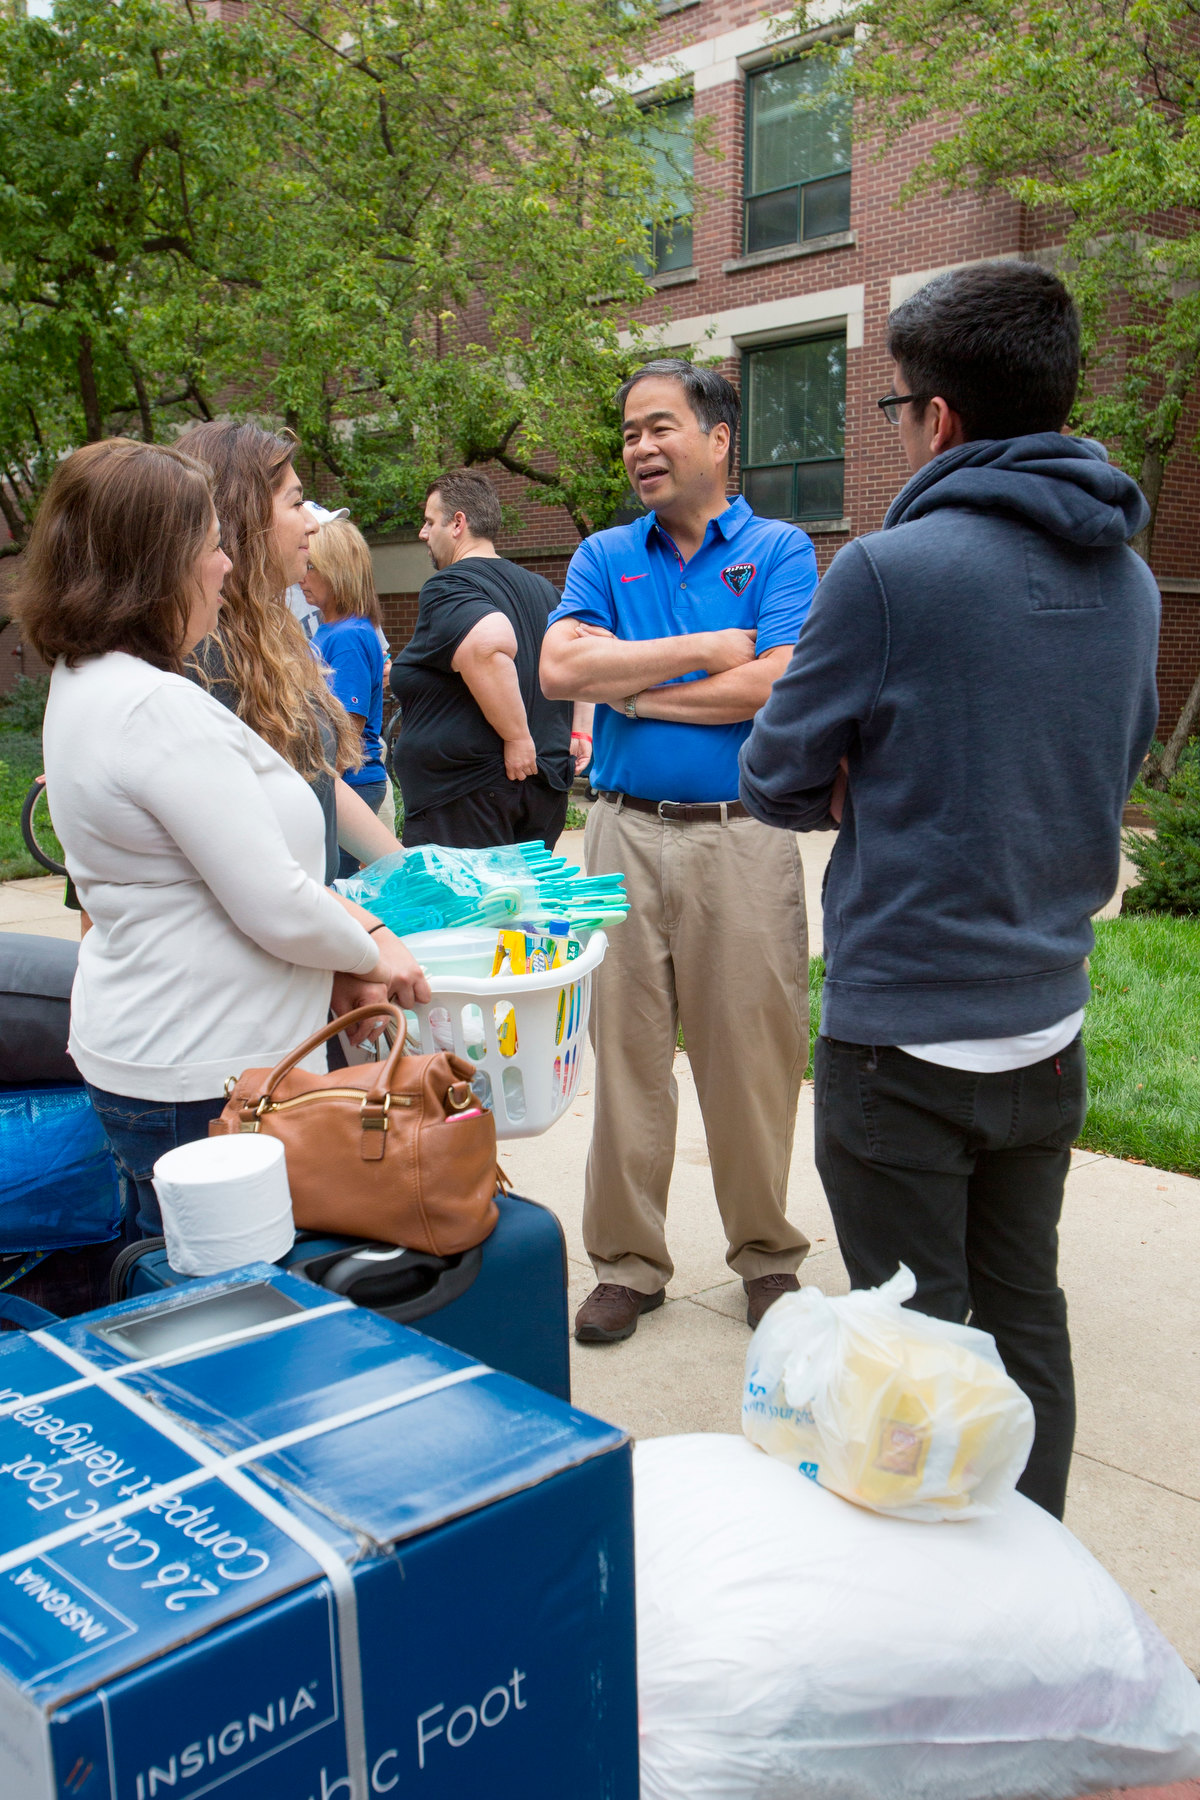 Esteban greets students during Move-In